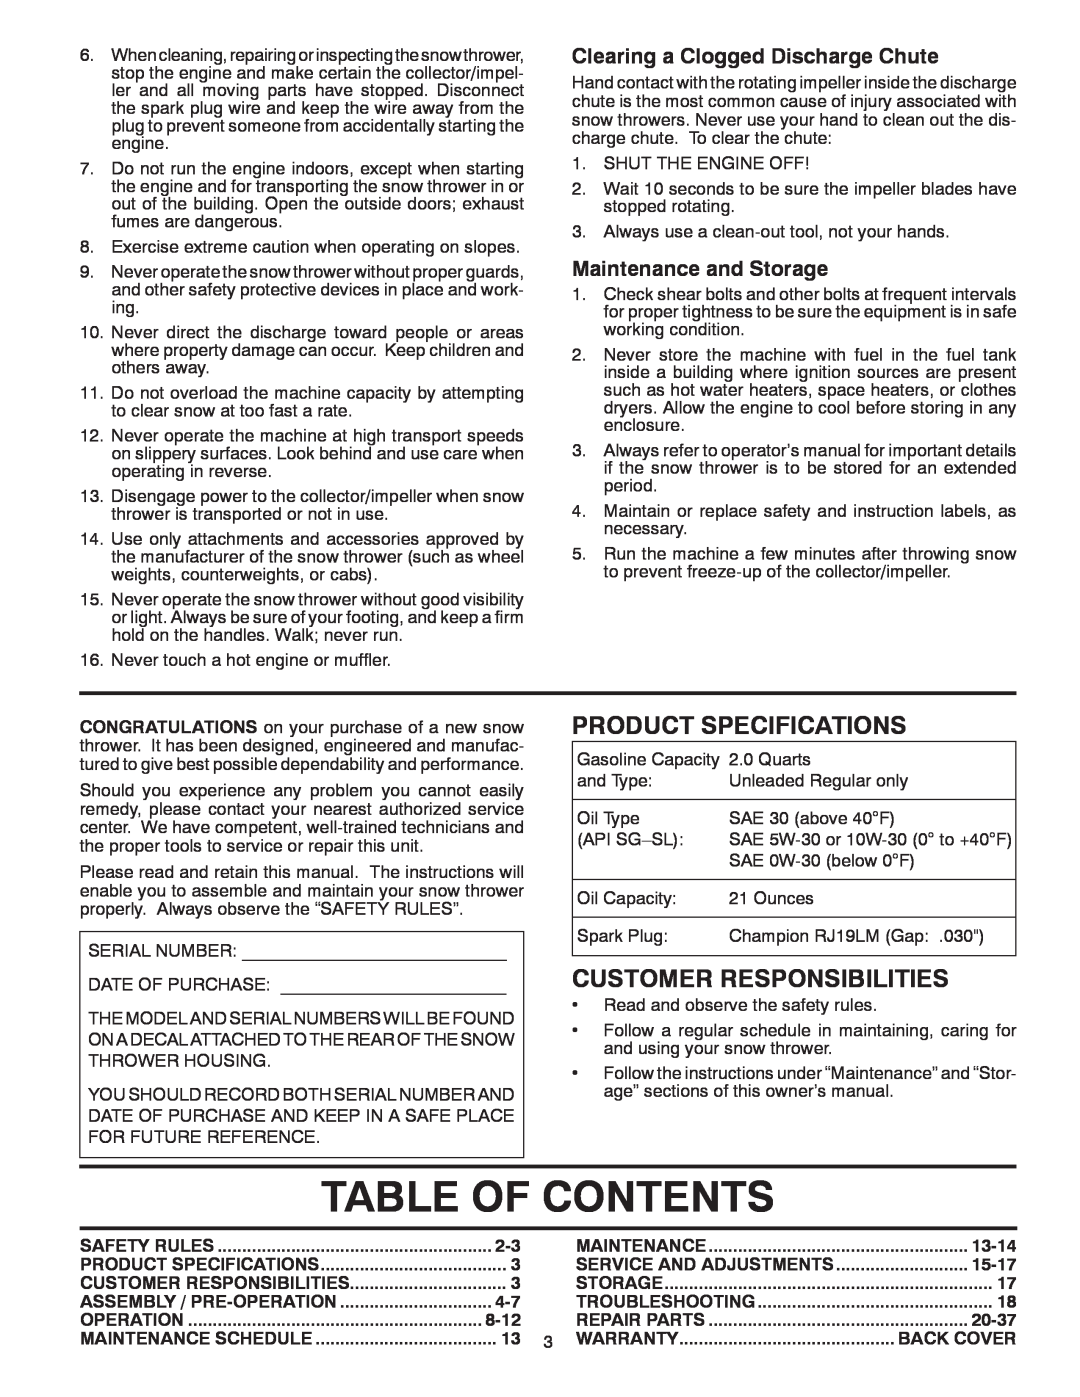 Poulan 422083 Table Of Contents, Product Specifications, Customer Responsibilities, Clearing a Clogged Discharge Chute 